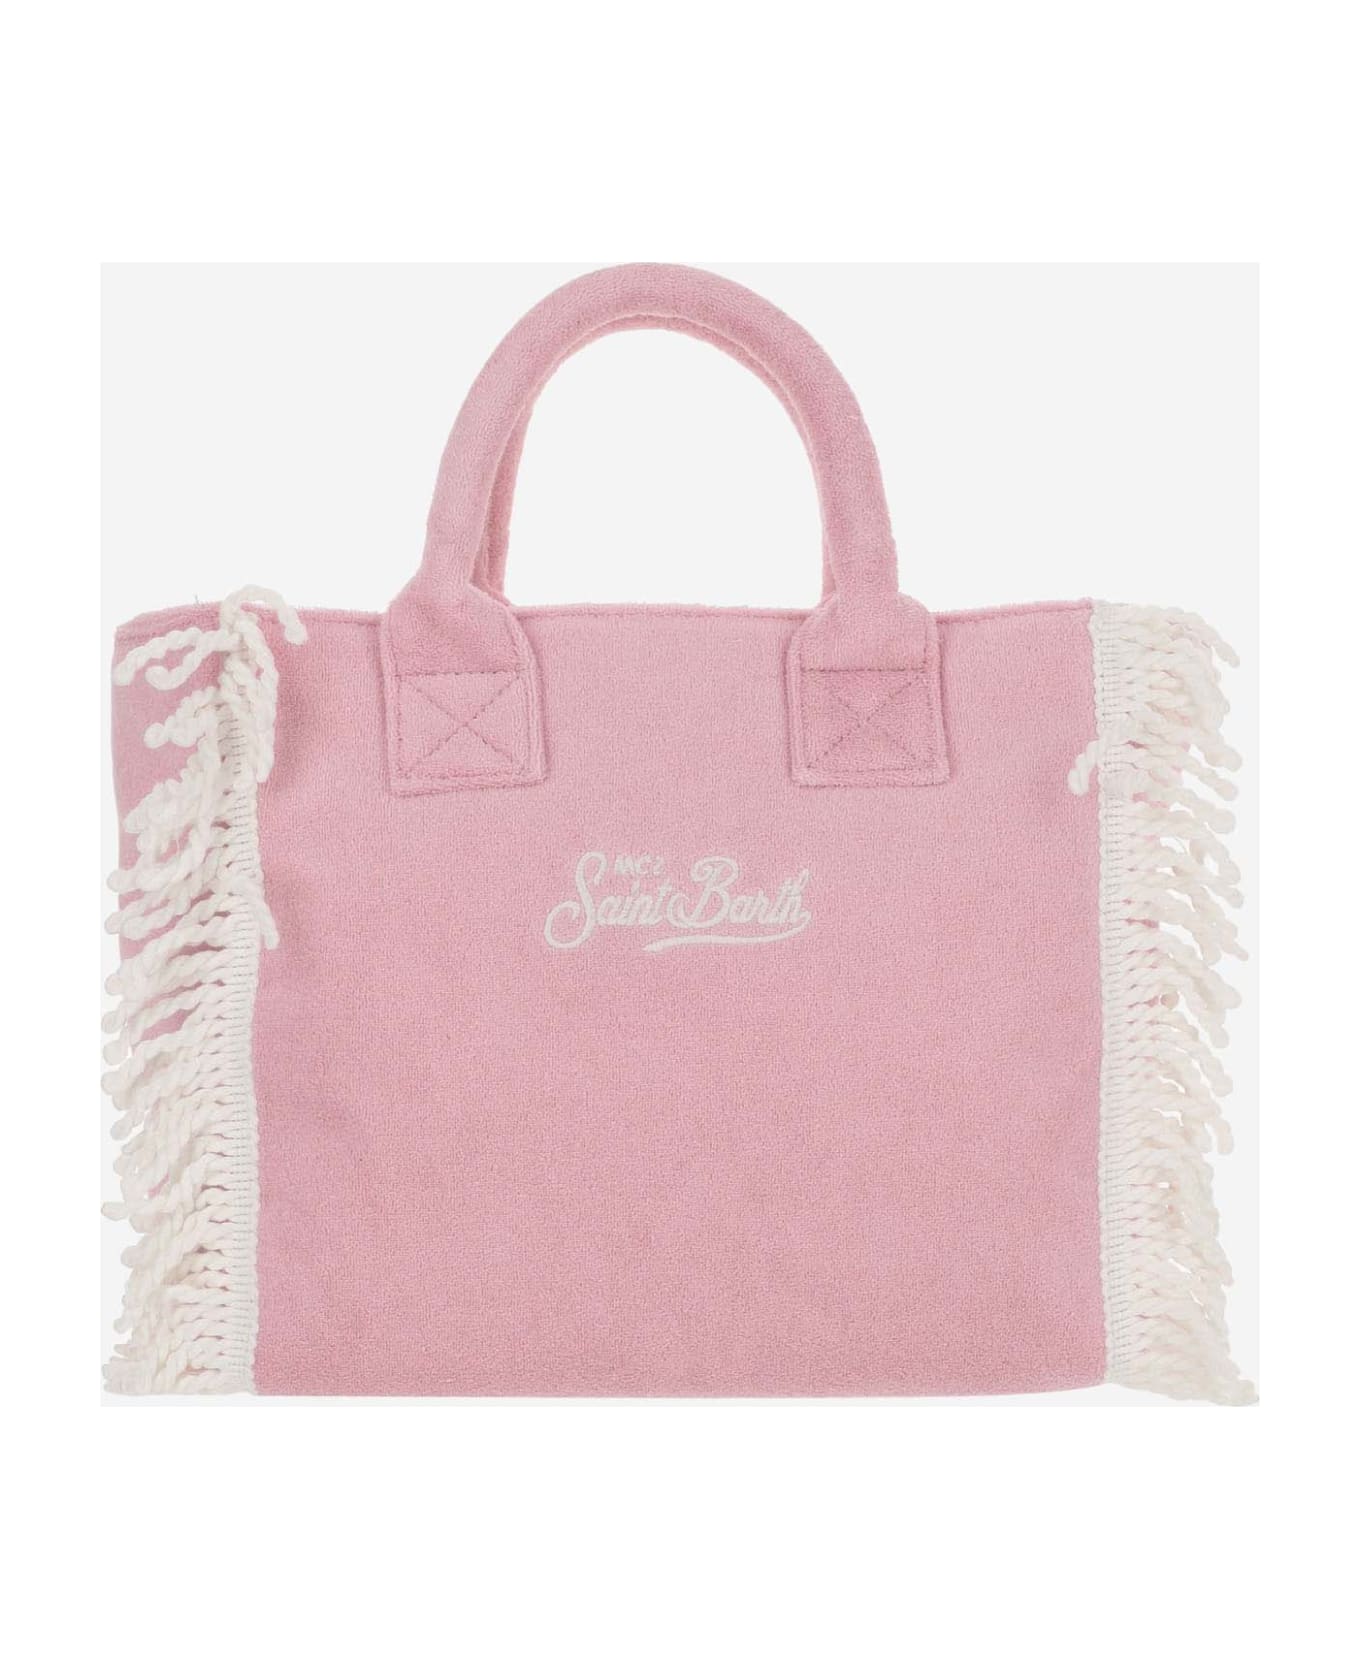 MC2 Saint Barth Colette Terry Tote Bag With Embroidery - Pink トートバッグ